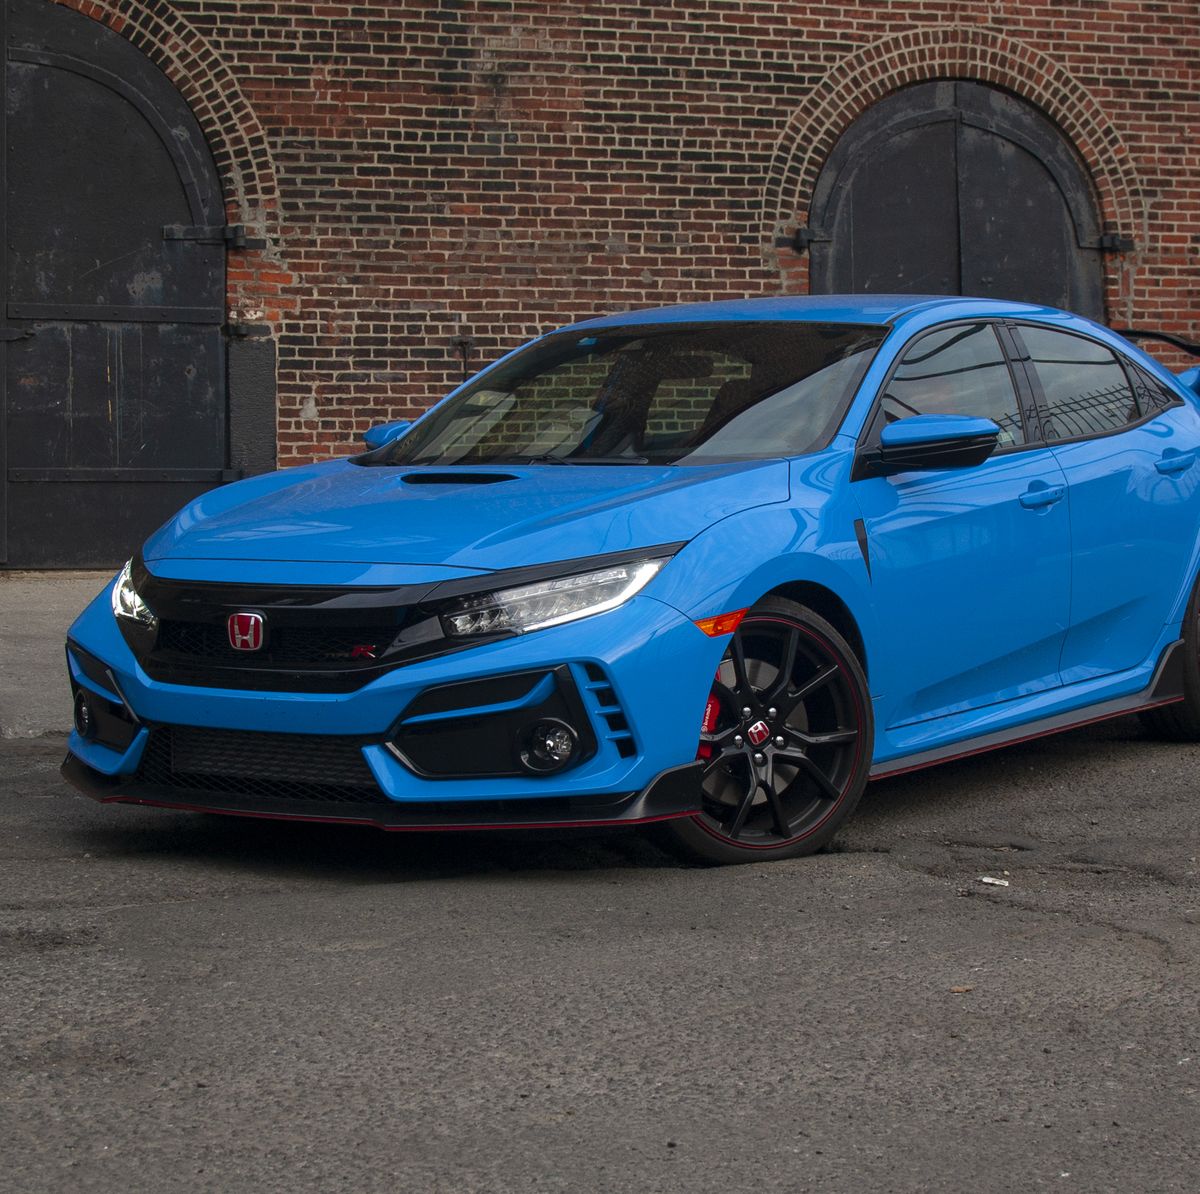 2020 Honda Civic Type R Revealed With Styling and Hardware Changes -  autoevolution